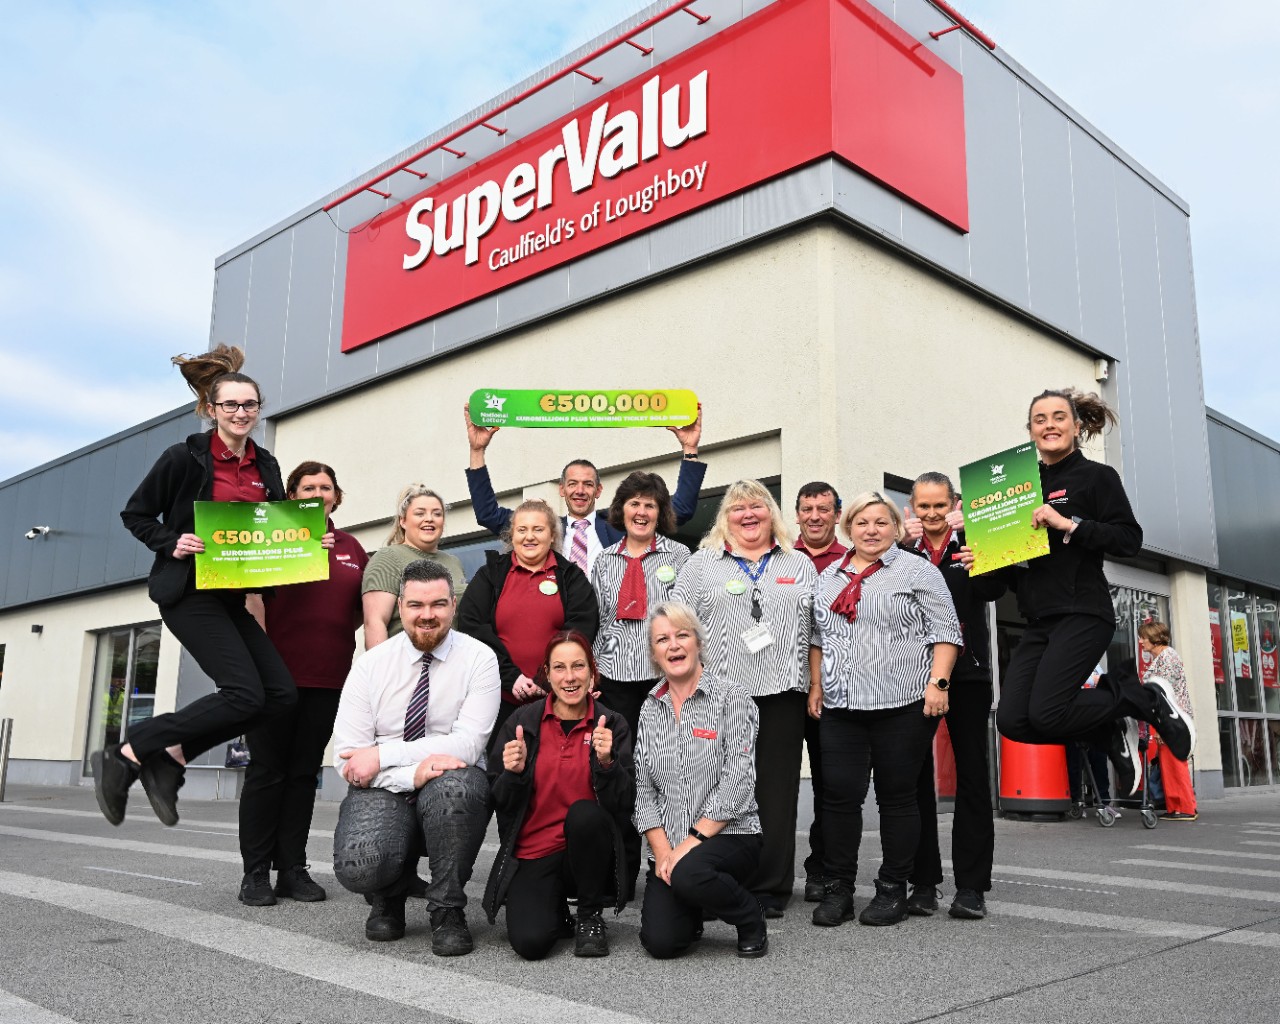 NO REPRO FEE: 20th September 2022. EuroMillions Plus - €500,000 Win. Staff at Caulfields SuperValu, Loughboy Shopping Centre, Co. Kilkenny celebrate with Fran Whearty of the National Lottery having sold the latest EuroMillions Plus - €500,000 Winning ticket. Picture: Vicky Comerford - Mac Innes Photography